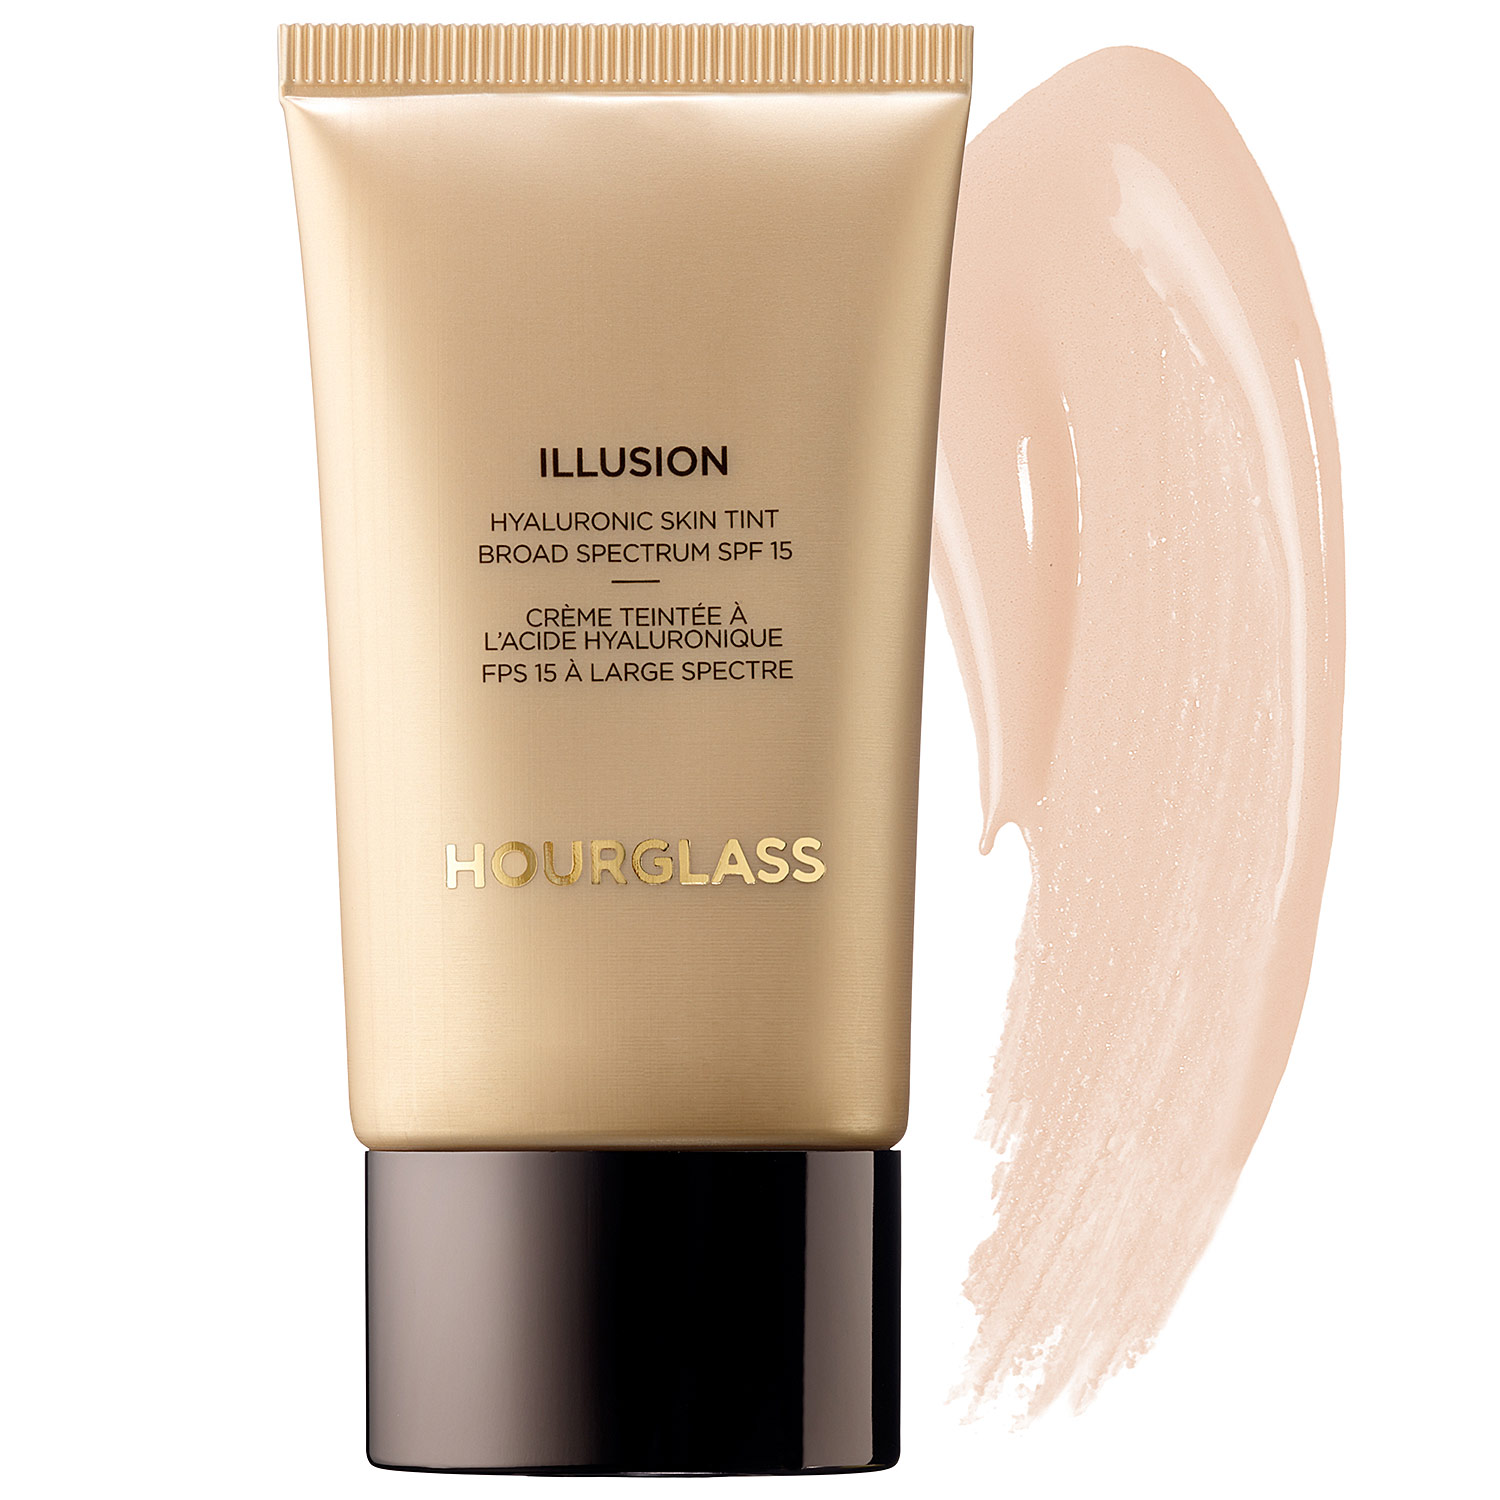 HOURGLASS Illusion Hyaluronic Skin Tint